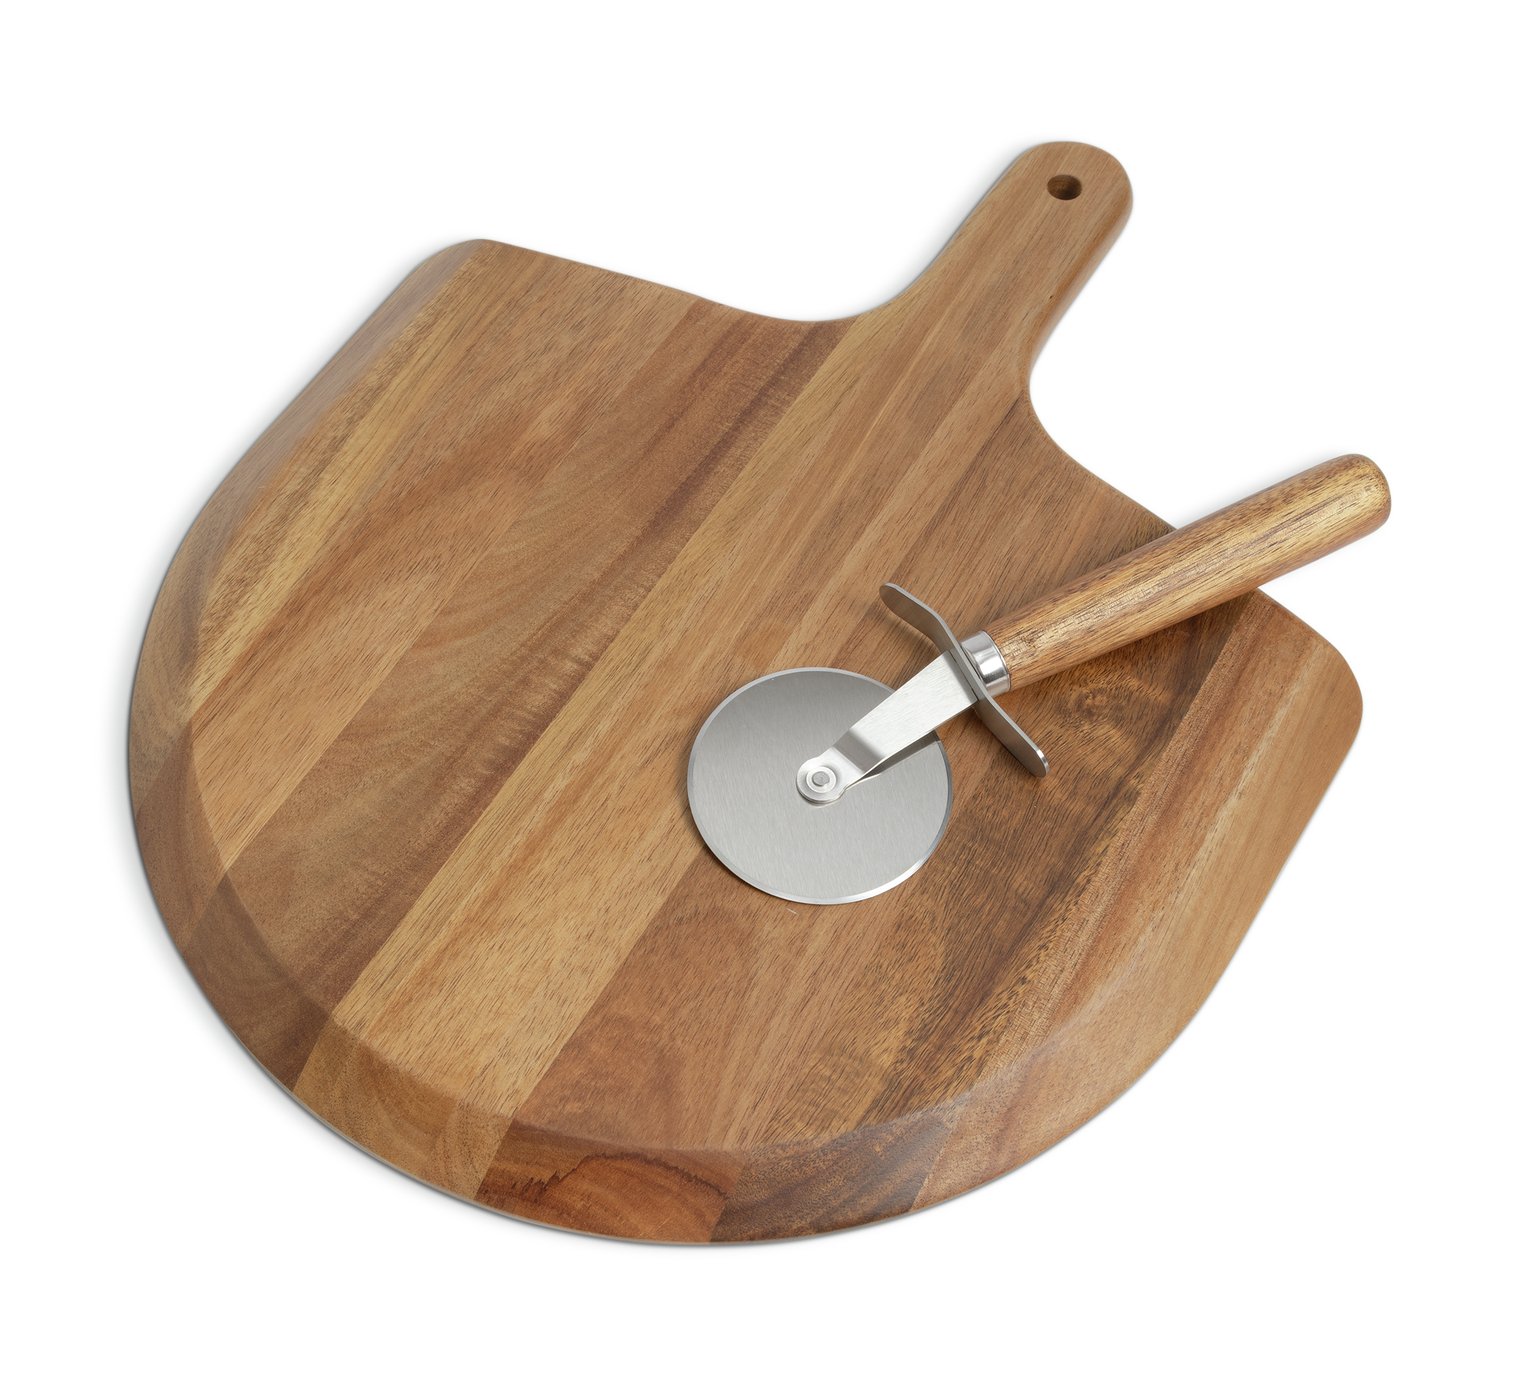 Habitat Industrial Acacia Wooden Pizza Board with Cutter